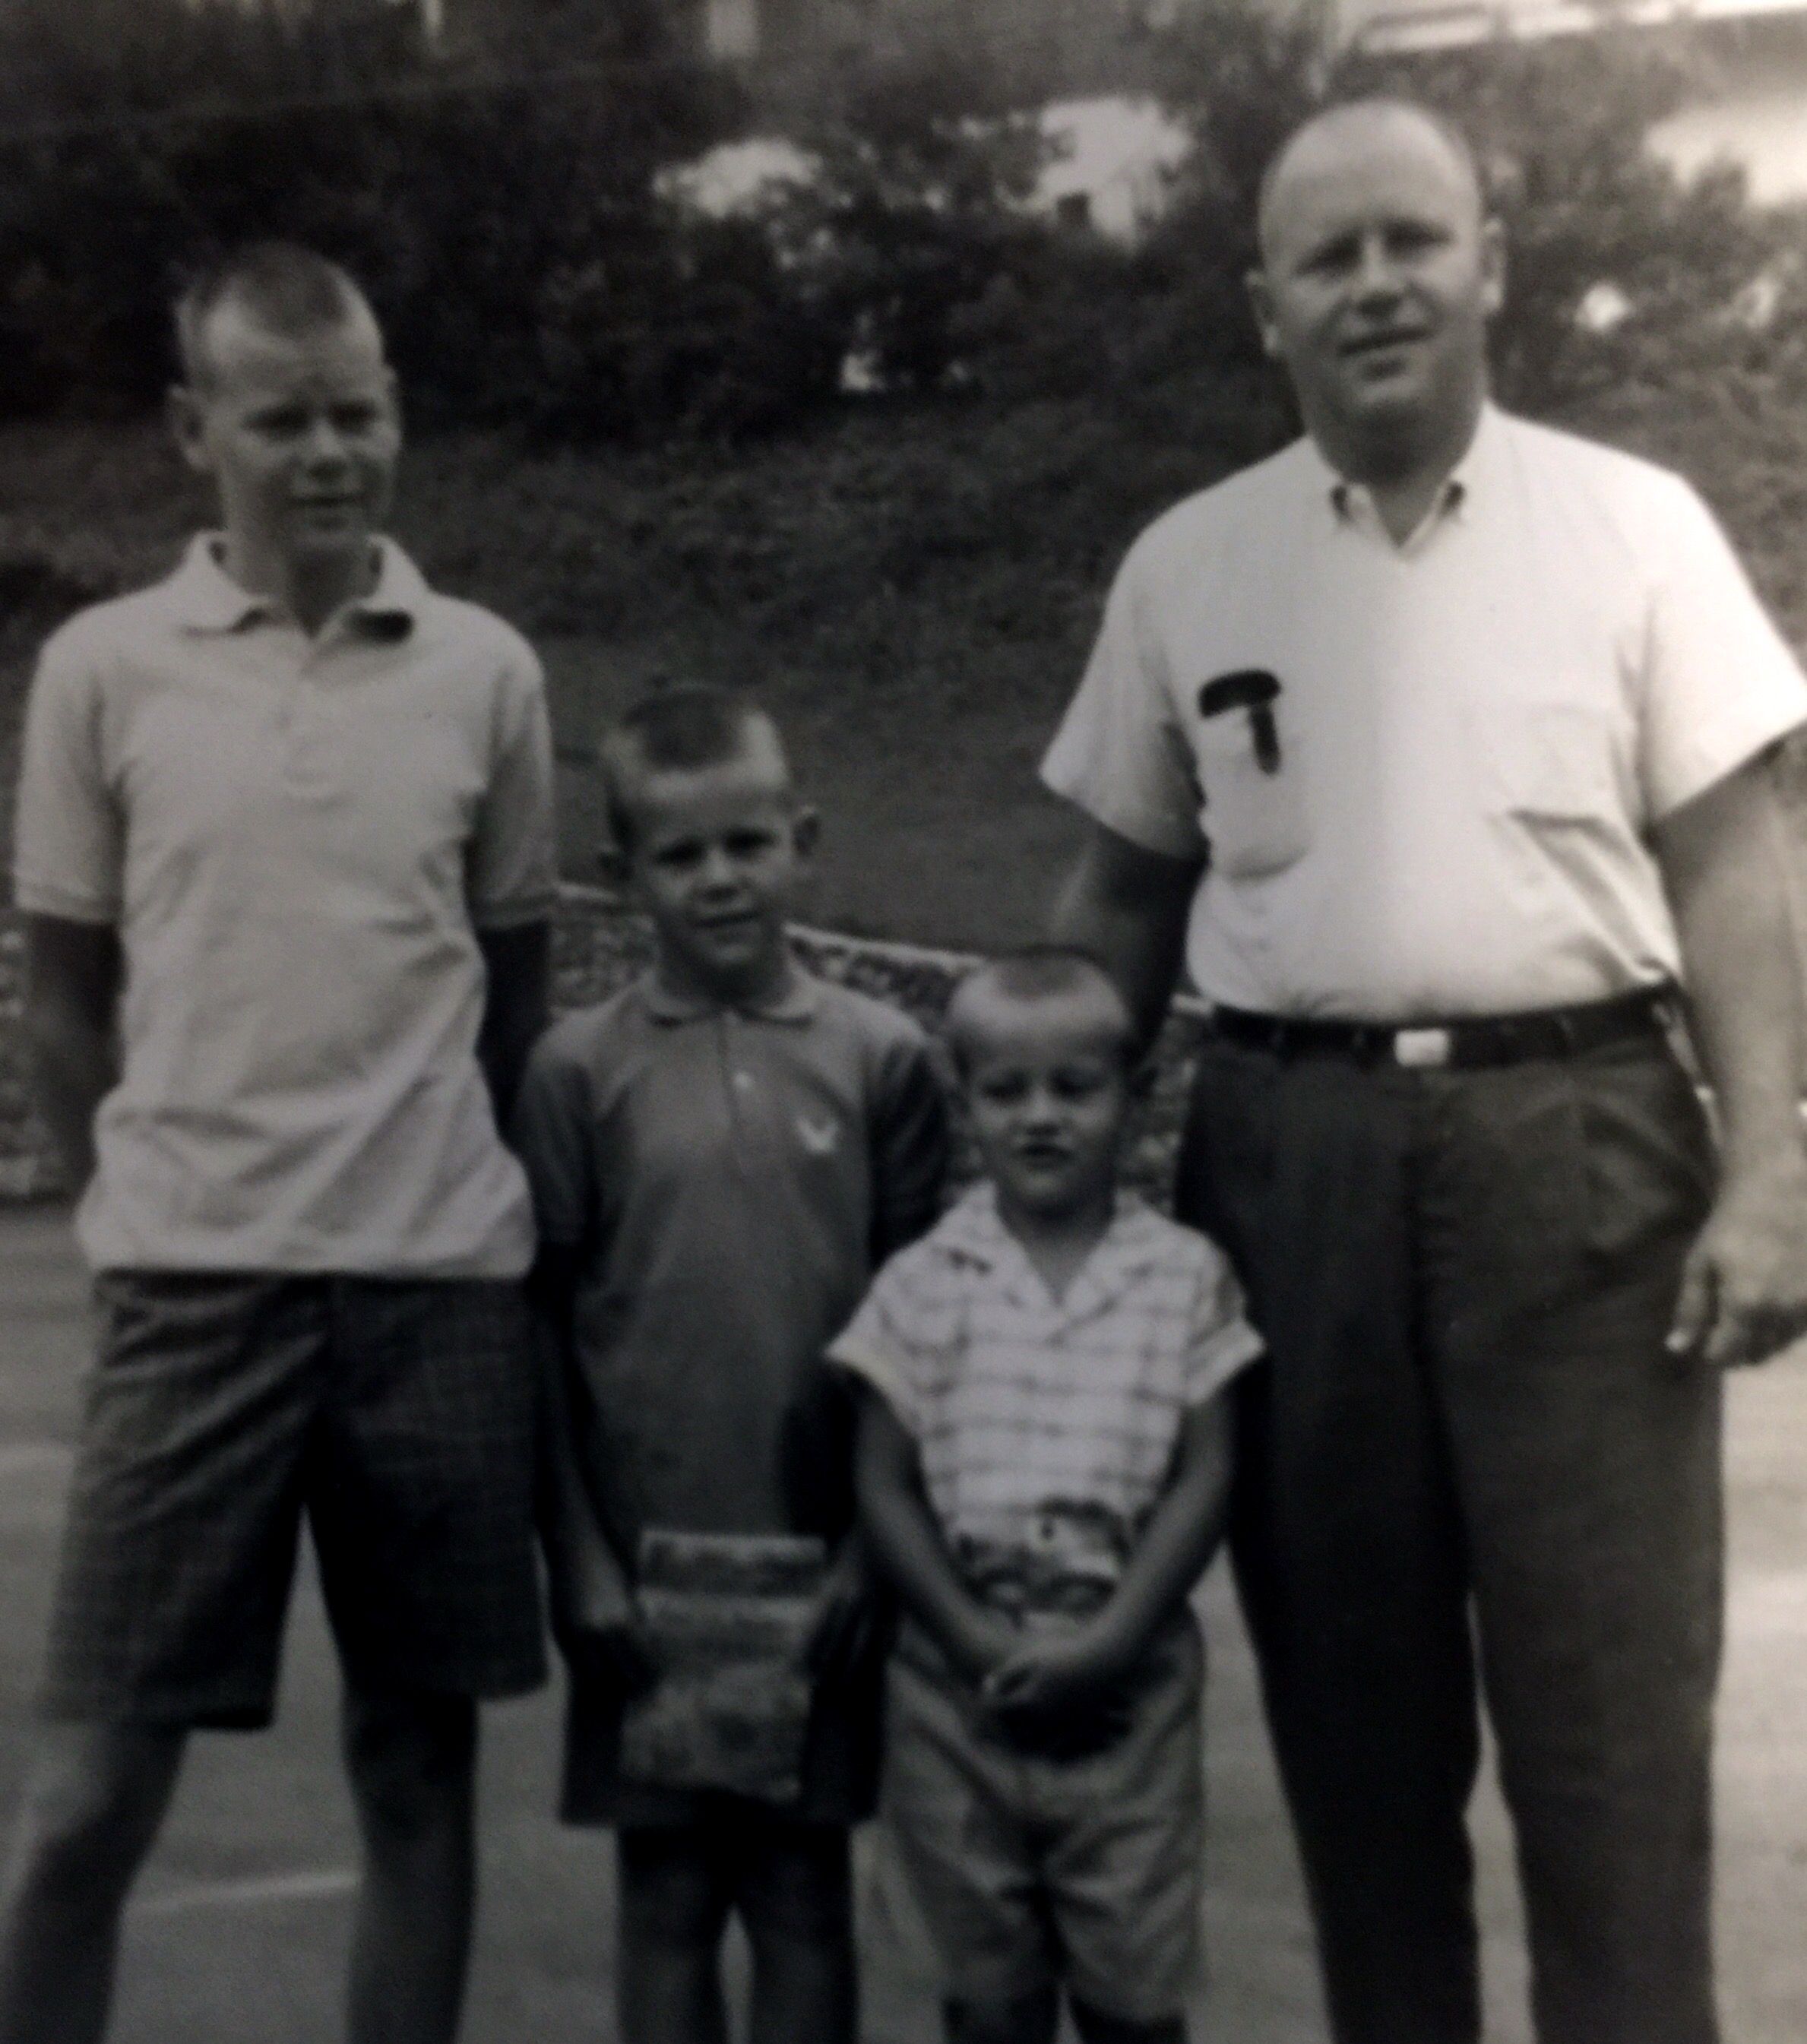 Earl C. Slay and sons, Carey, Johnny, and Mark, around 1959.
